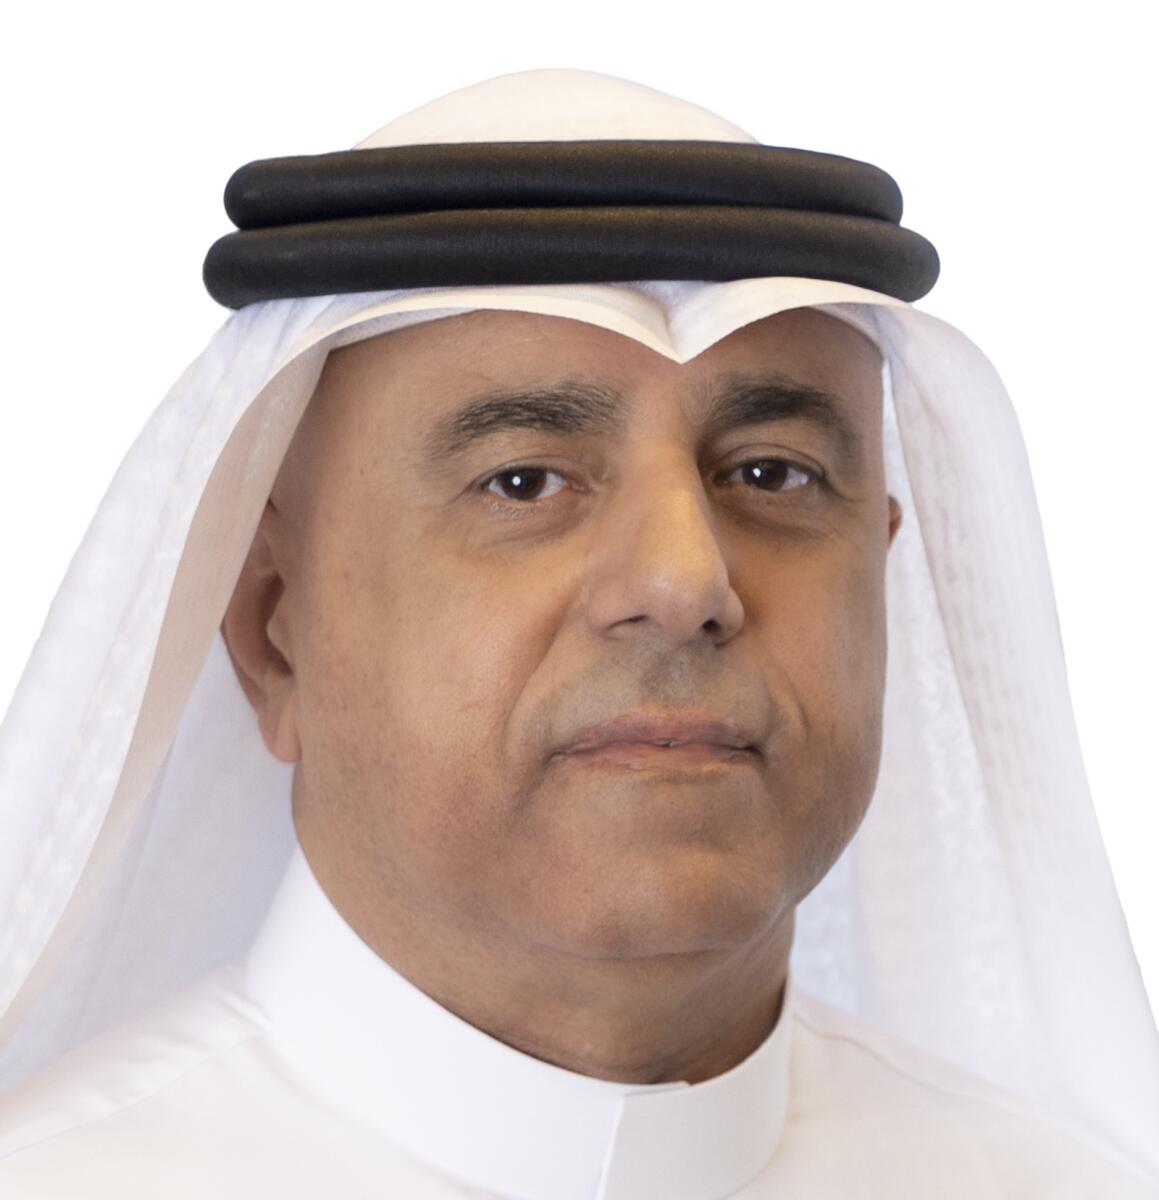 Nassser Al Awadhi, group chief executive of ADIB, said this has been an extraordinary year for ADIB as the bank delivered record-breaking performance across all matrix.